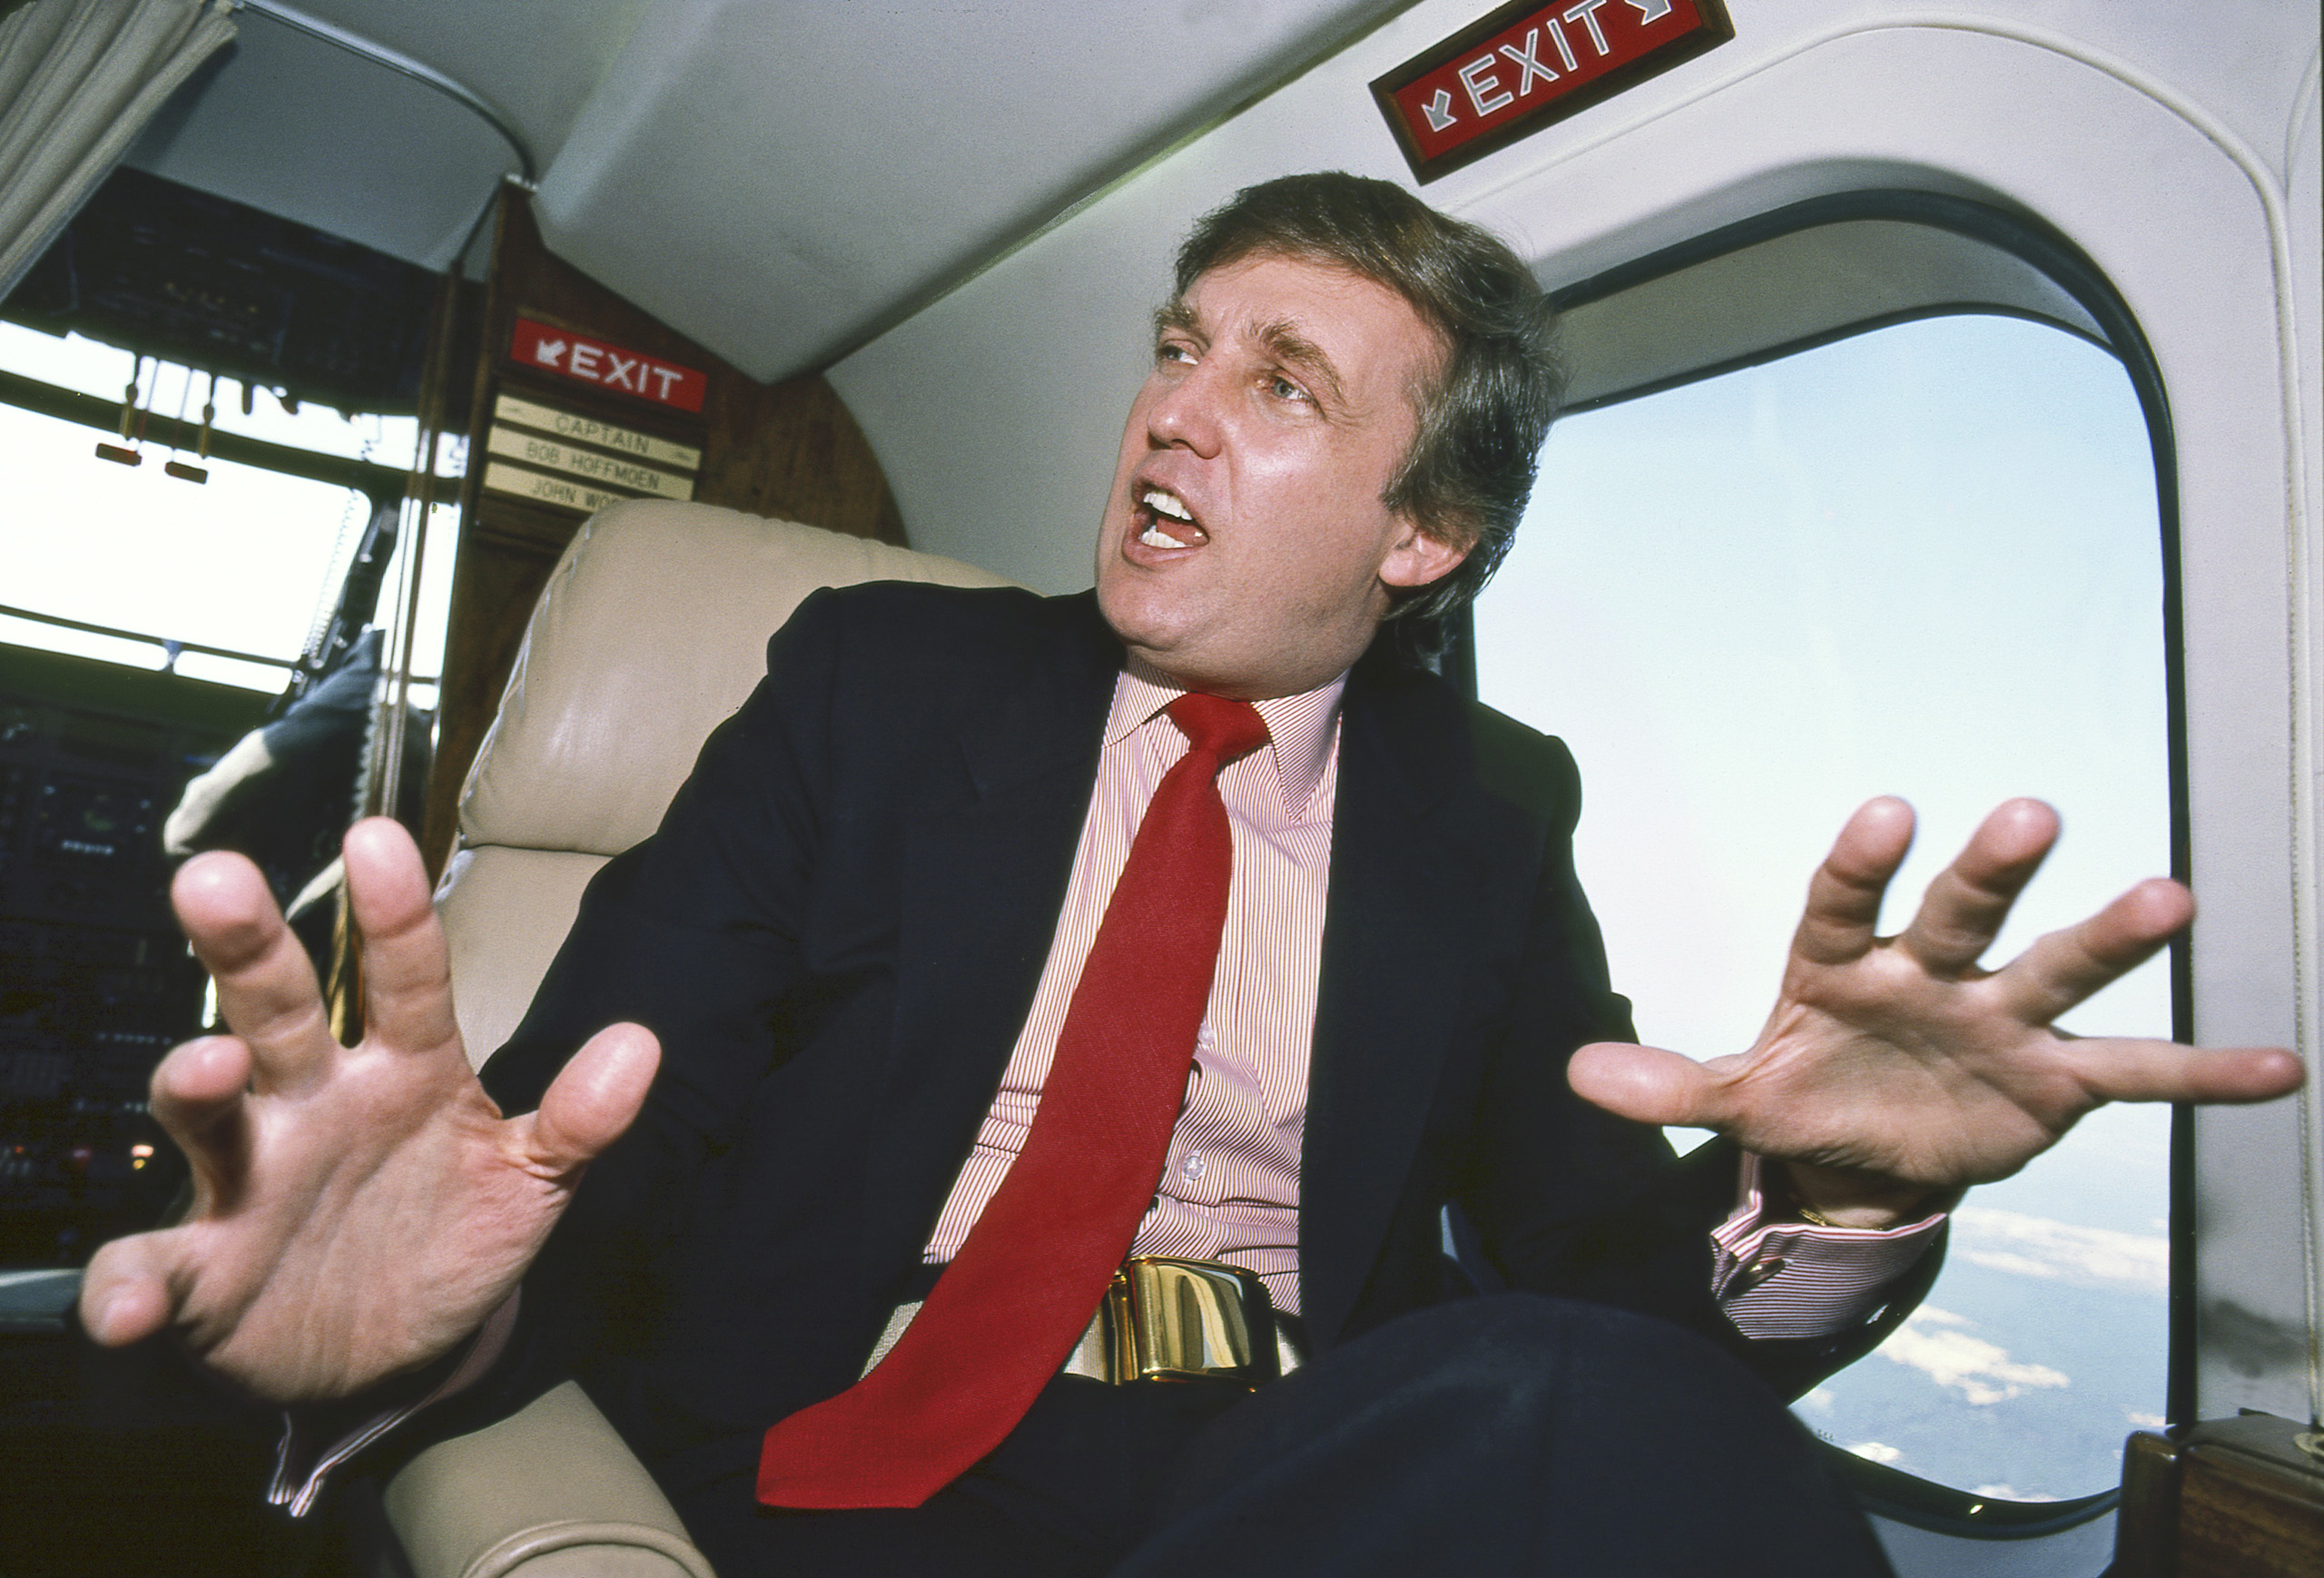 1987 Trump gesticulates during a helicopter ride to Atlantic City. Benson, who prides himself on spontaneity and closeness, said he likes “to get people moving.”